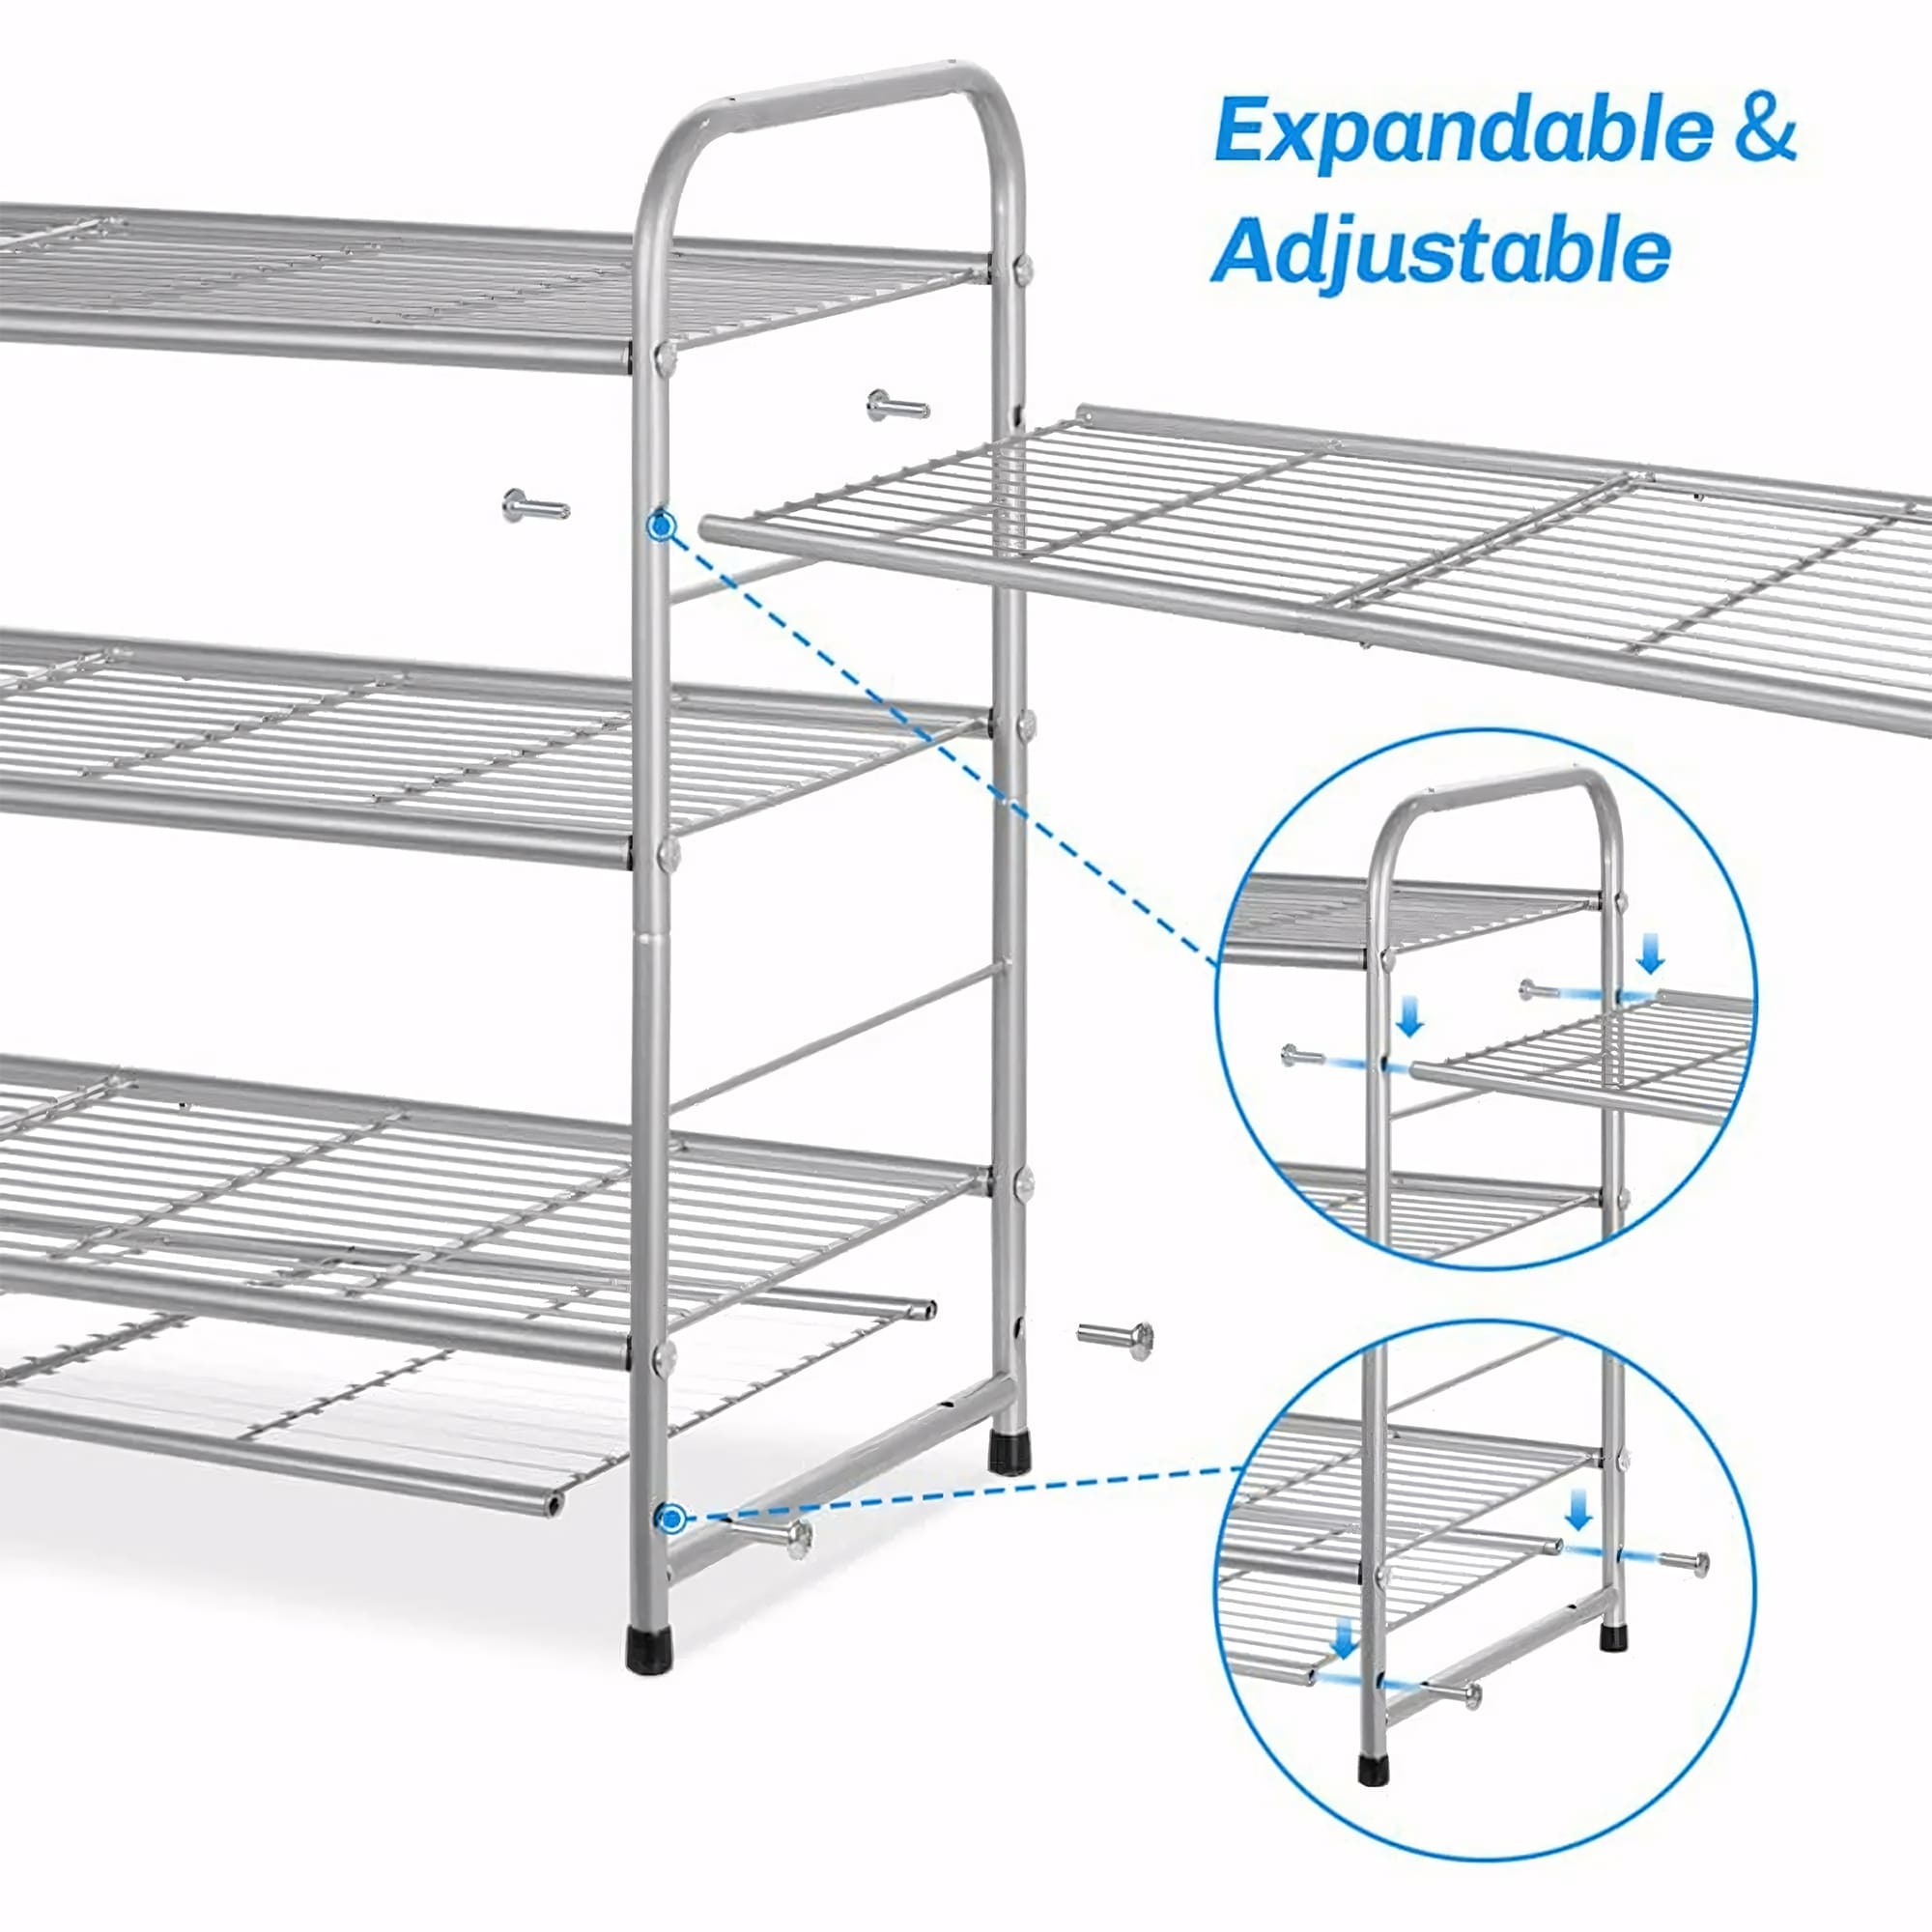 https://ak1.ostkcdn.com/images/products/is/images/direct/722e27e663a63119d7e4af2bb5f5d65d2ec84b35/3-Tier-Adjustable-%26-Freestanding-Shoe-Rack-Wire-Grid-Storage.jpg